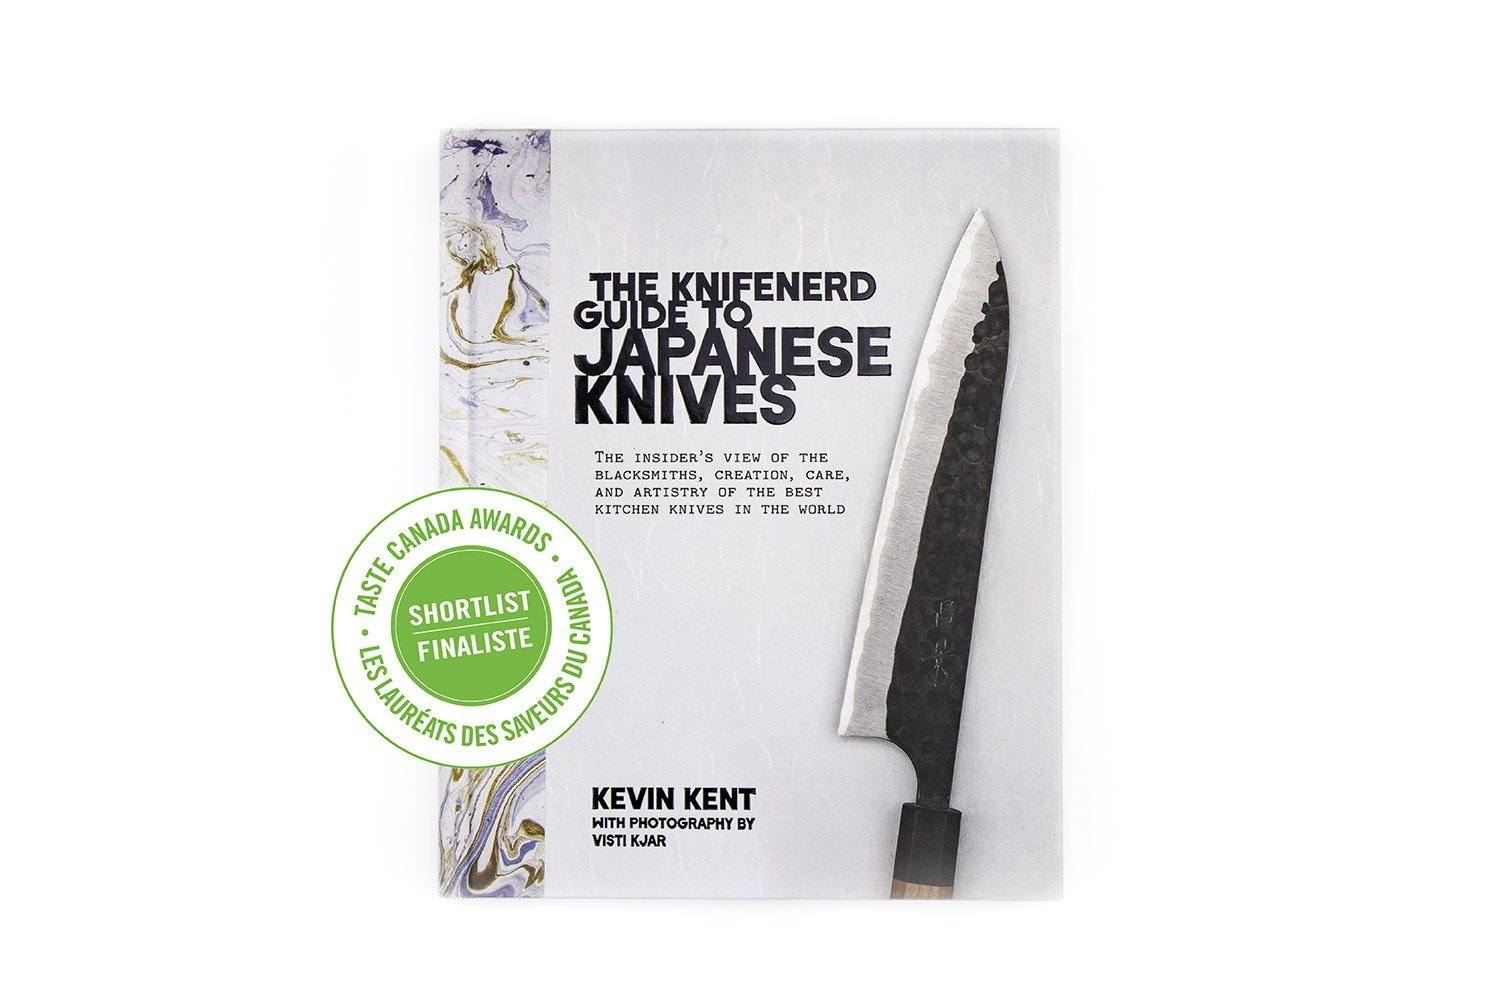 The Knifenerd Guide to Japanese Knives